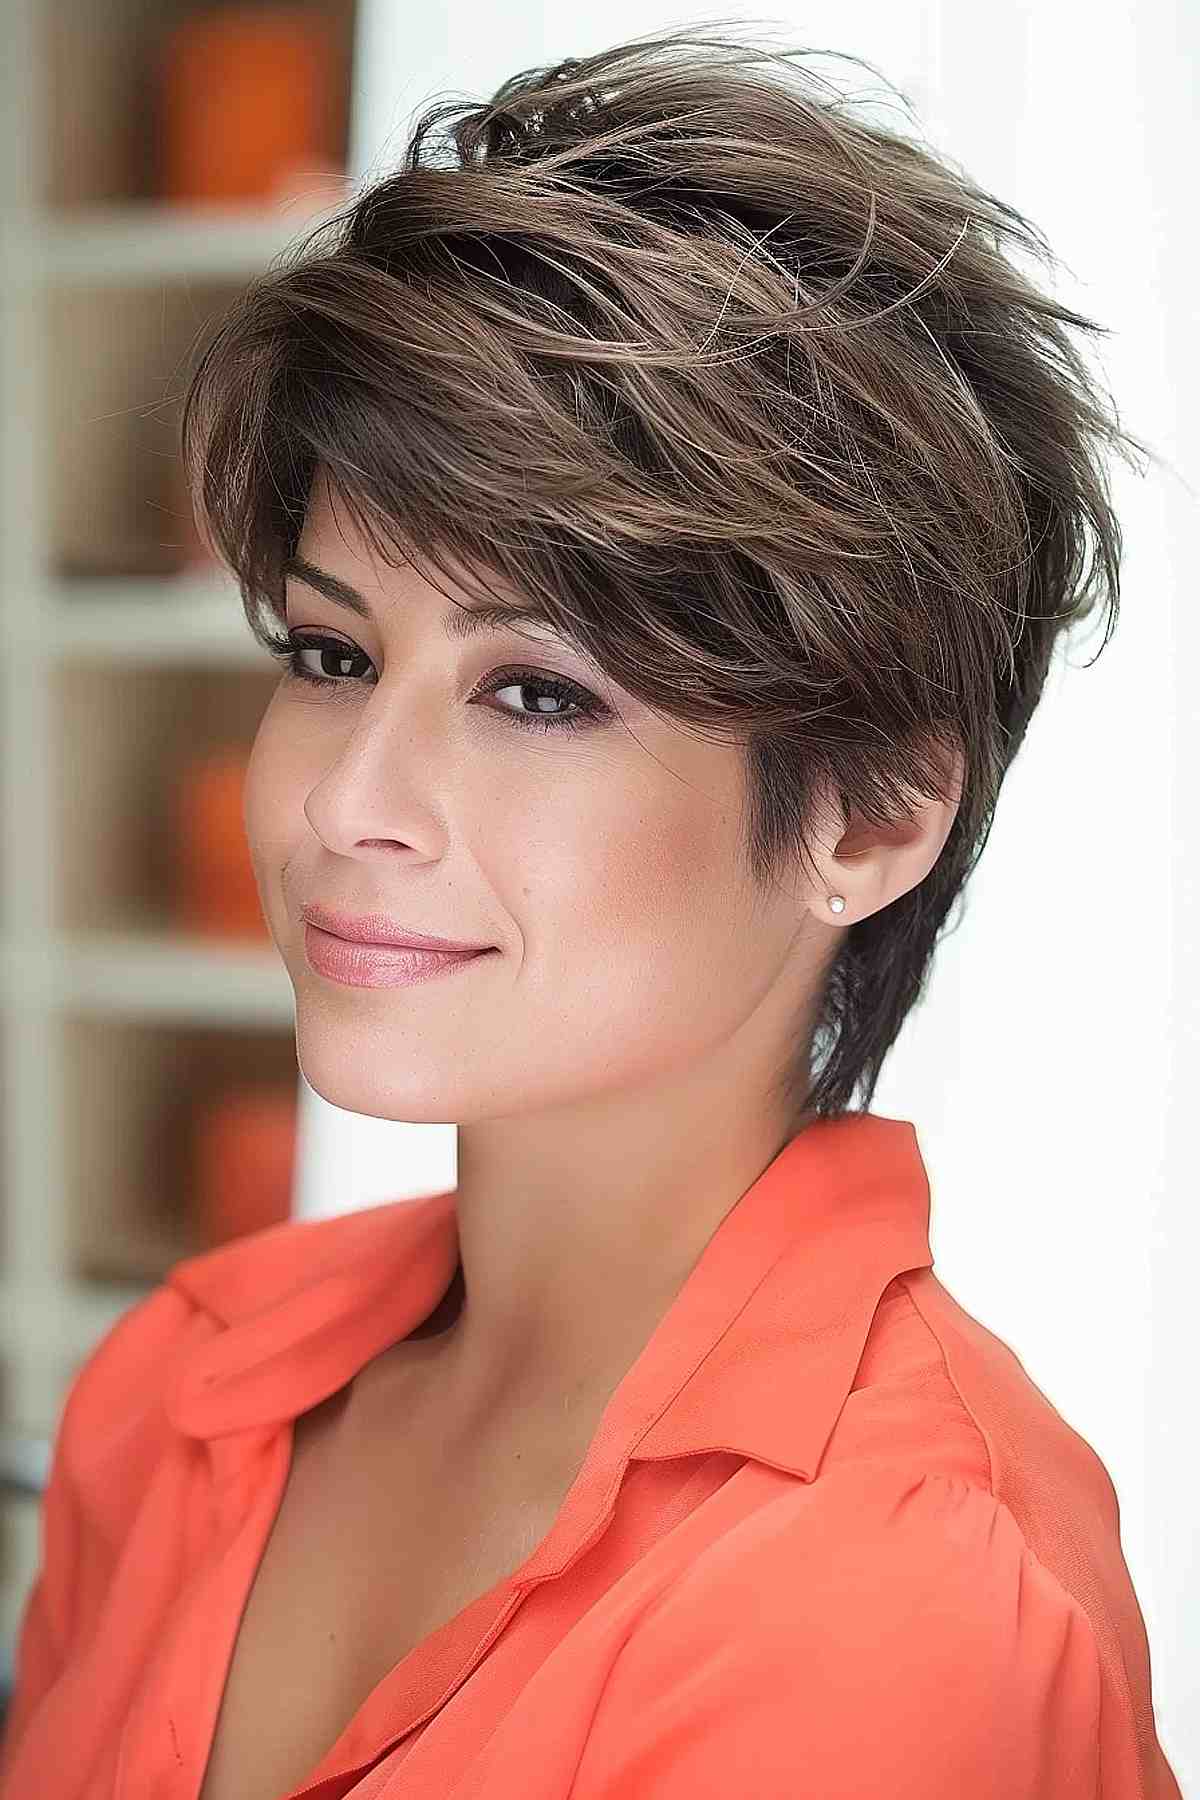 Woman with a long feathered pixie cut featuring tapered layers and a color gradient from dark roots to lighter tips, perfect for adding volume to thin hair.